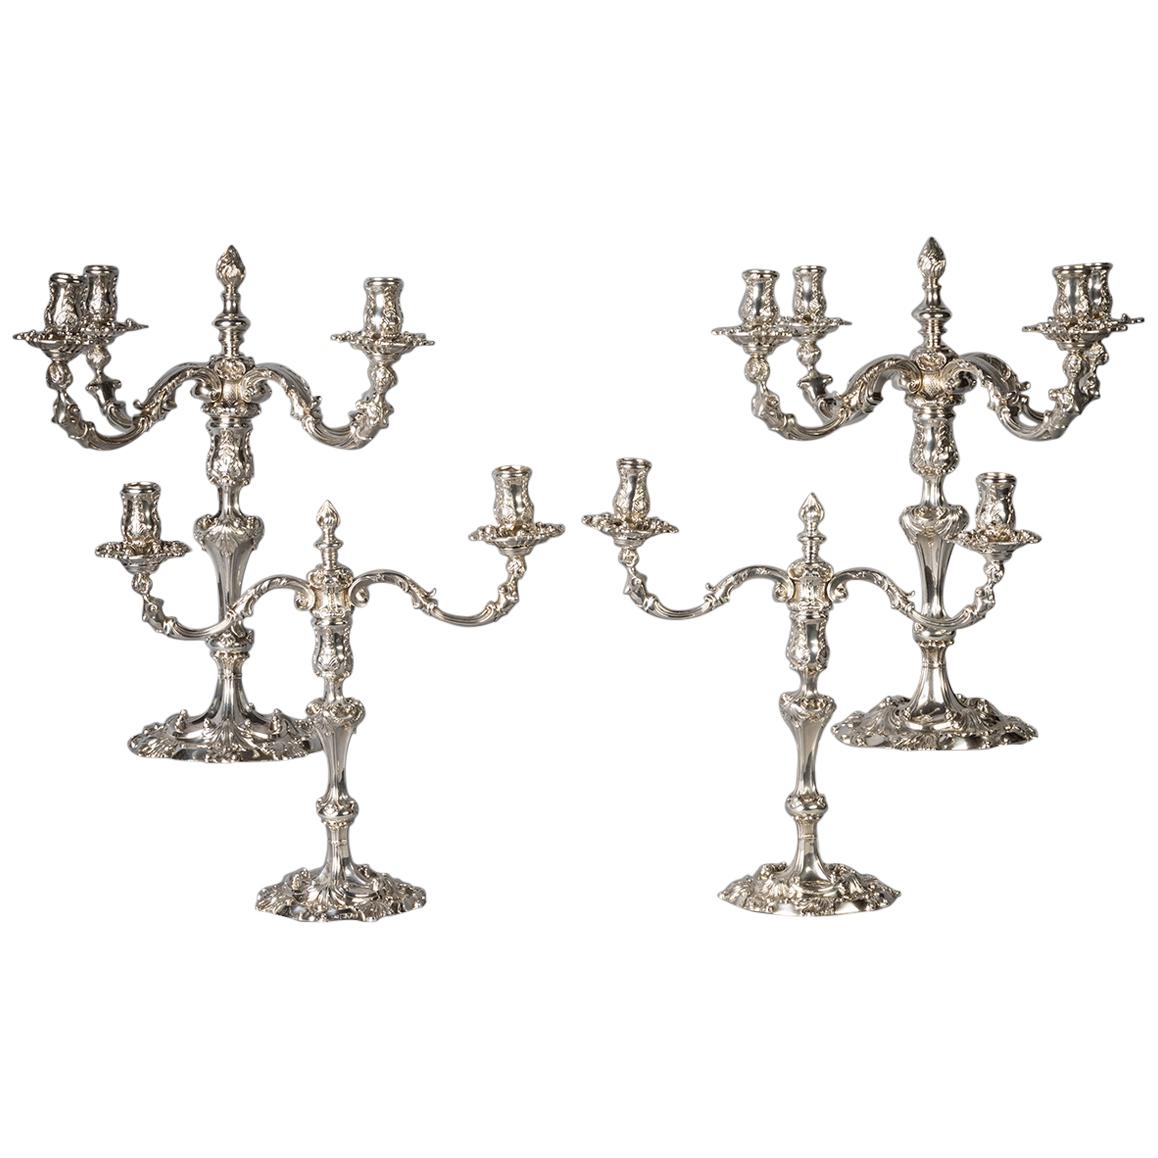 Suite of Four English Silver Candelabra